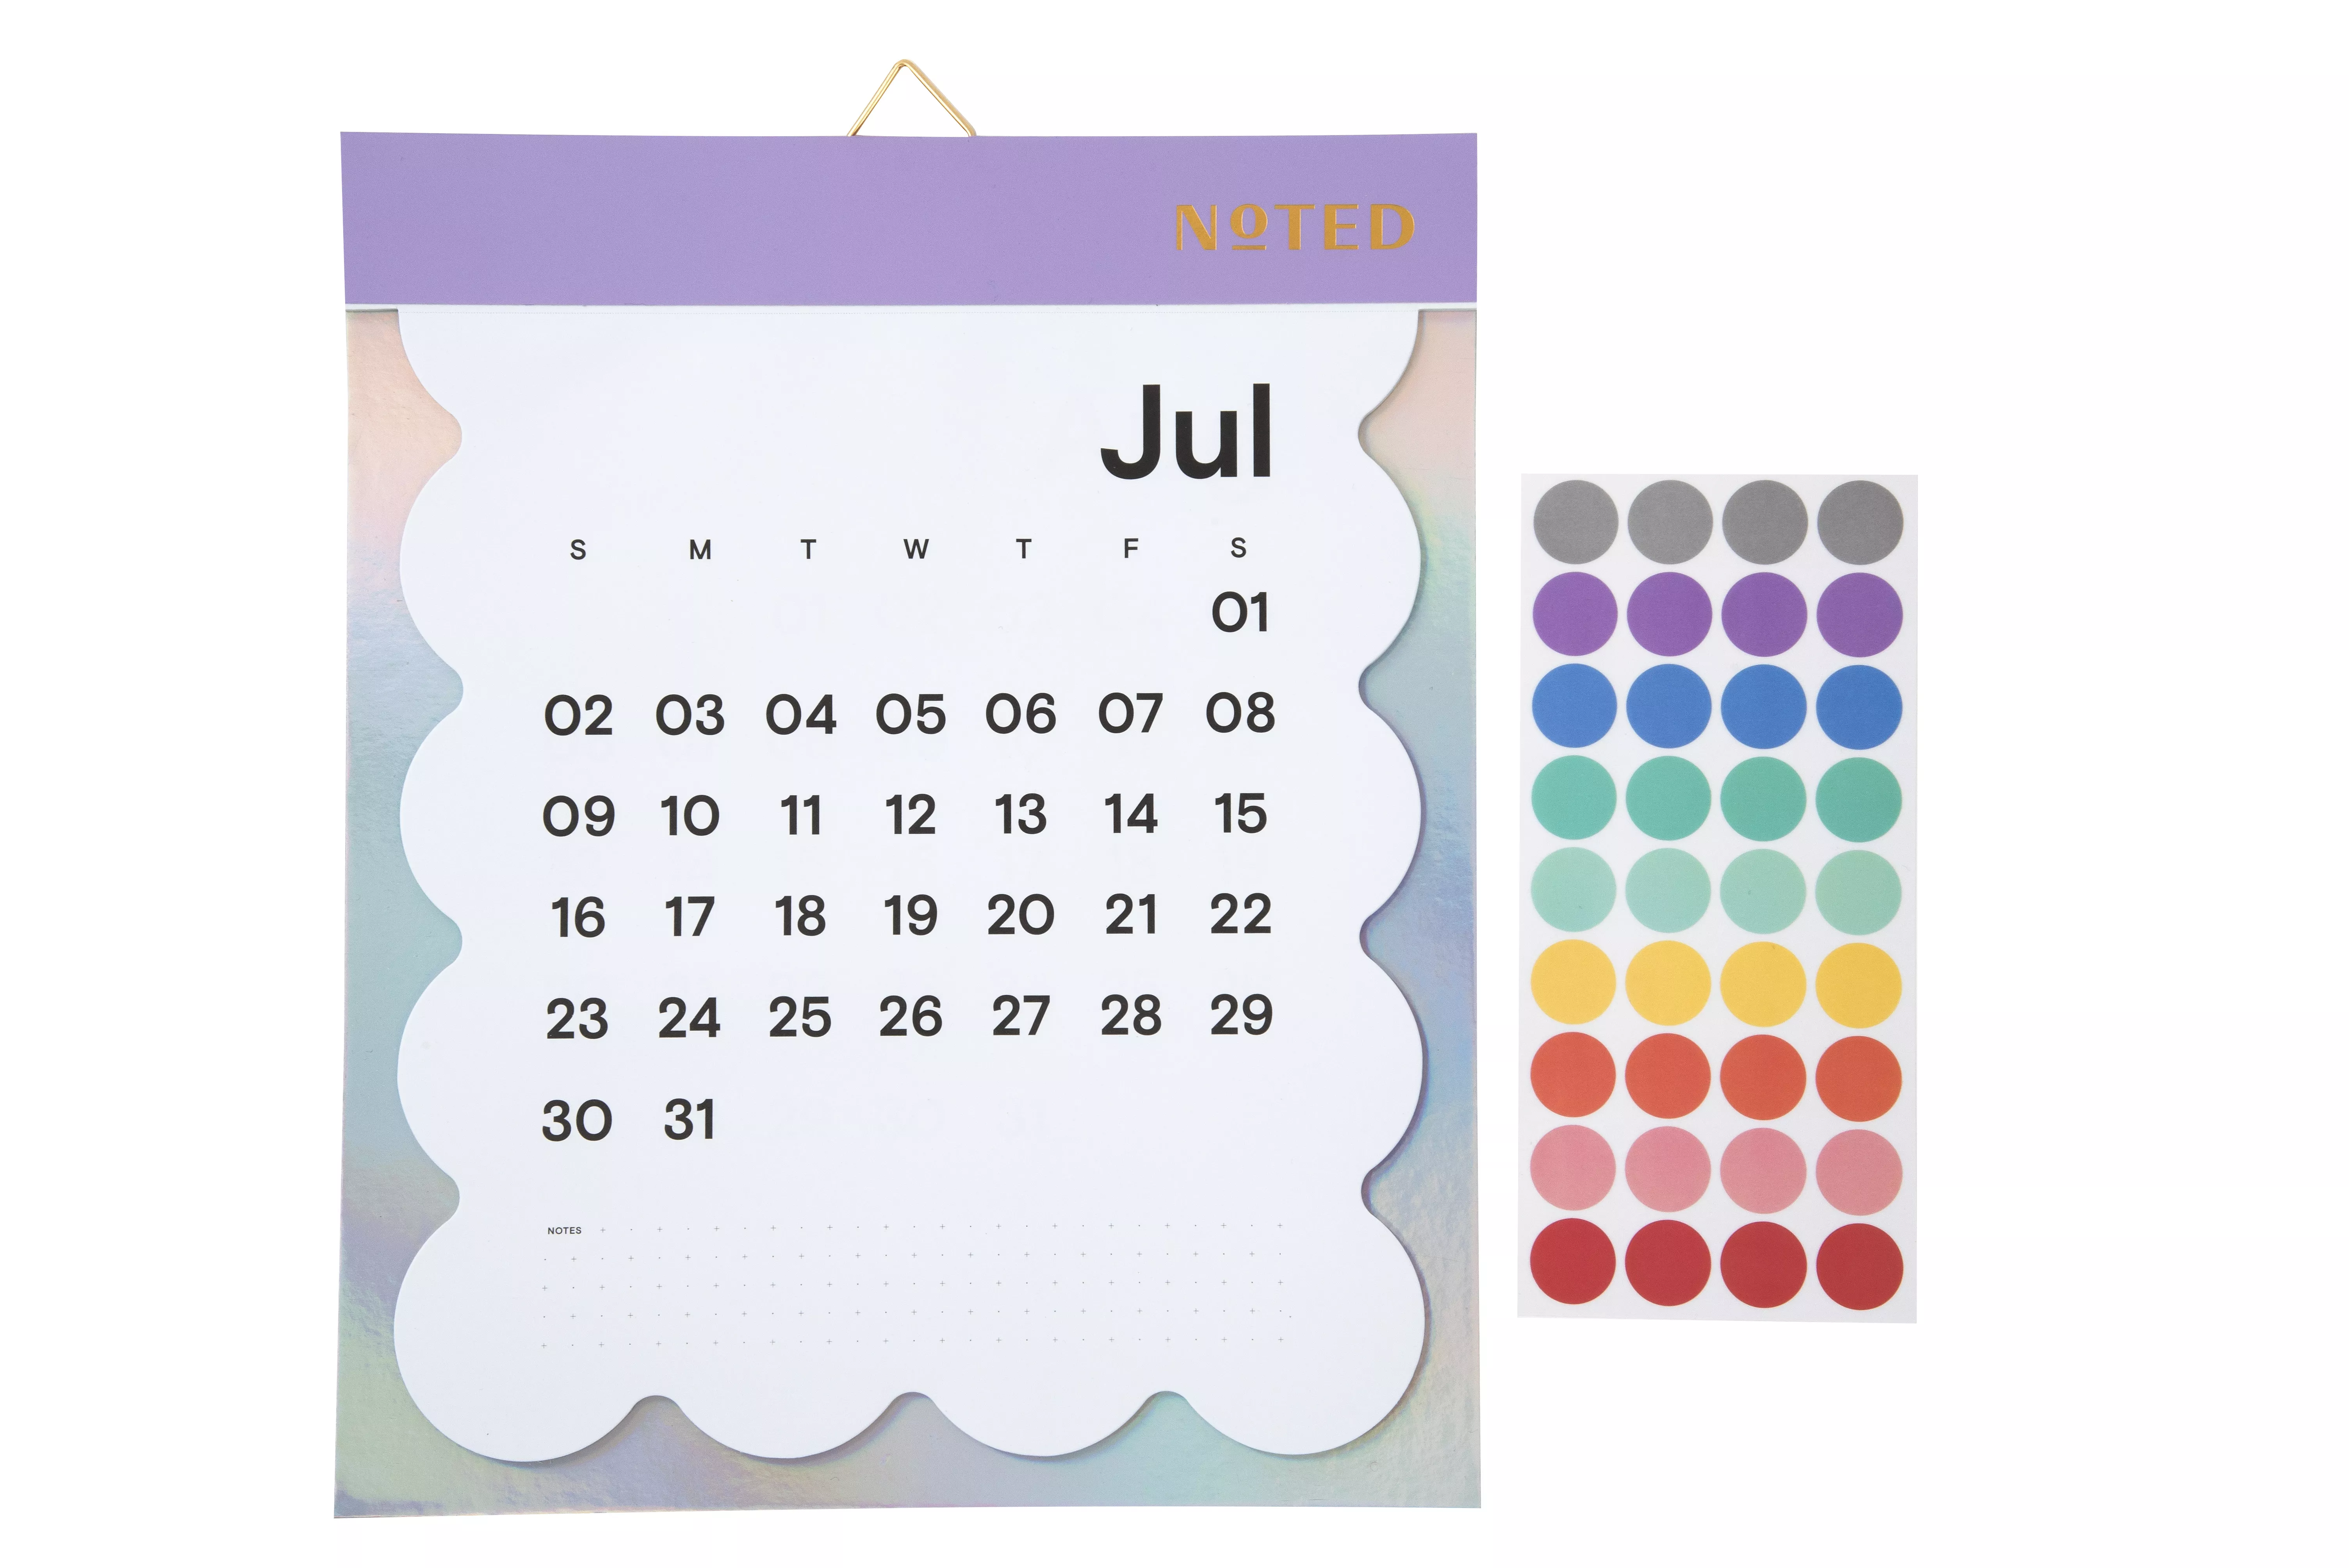 UPC 00076308413248 | Post-it® Wall Calendar with Planner Dots NTD7-CAL-1